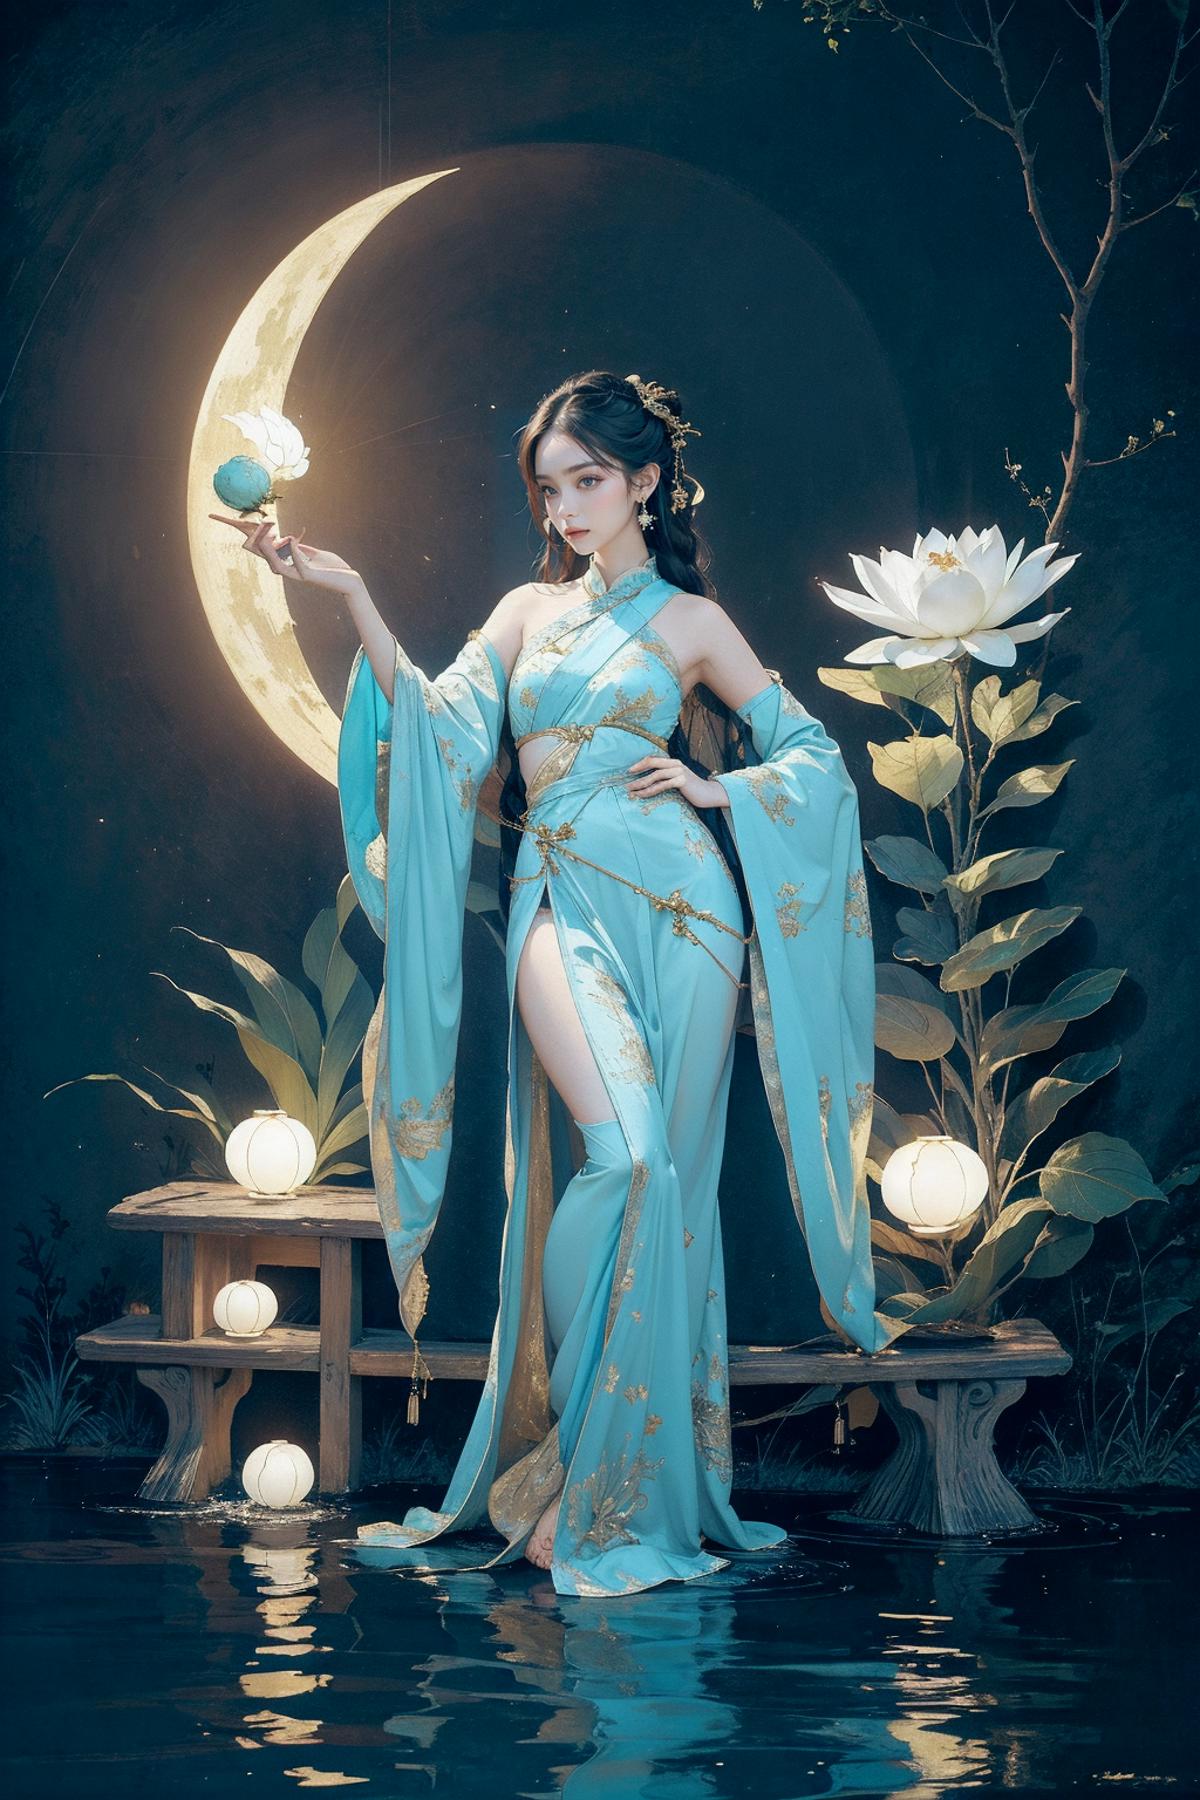 An Asian woman in a blue dress with a moon background.